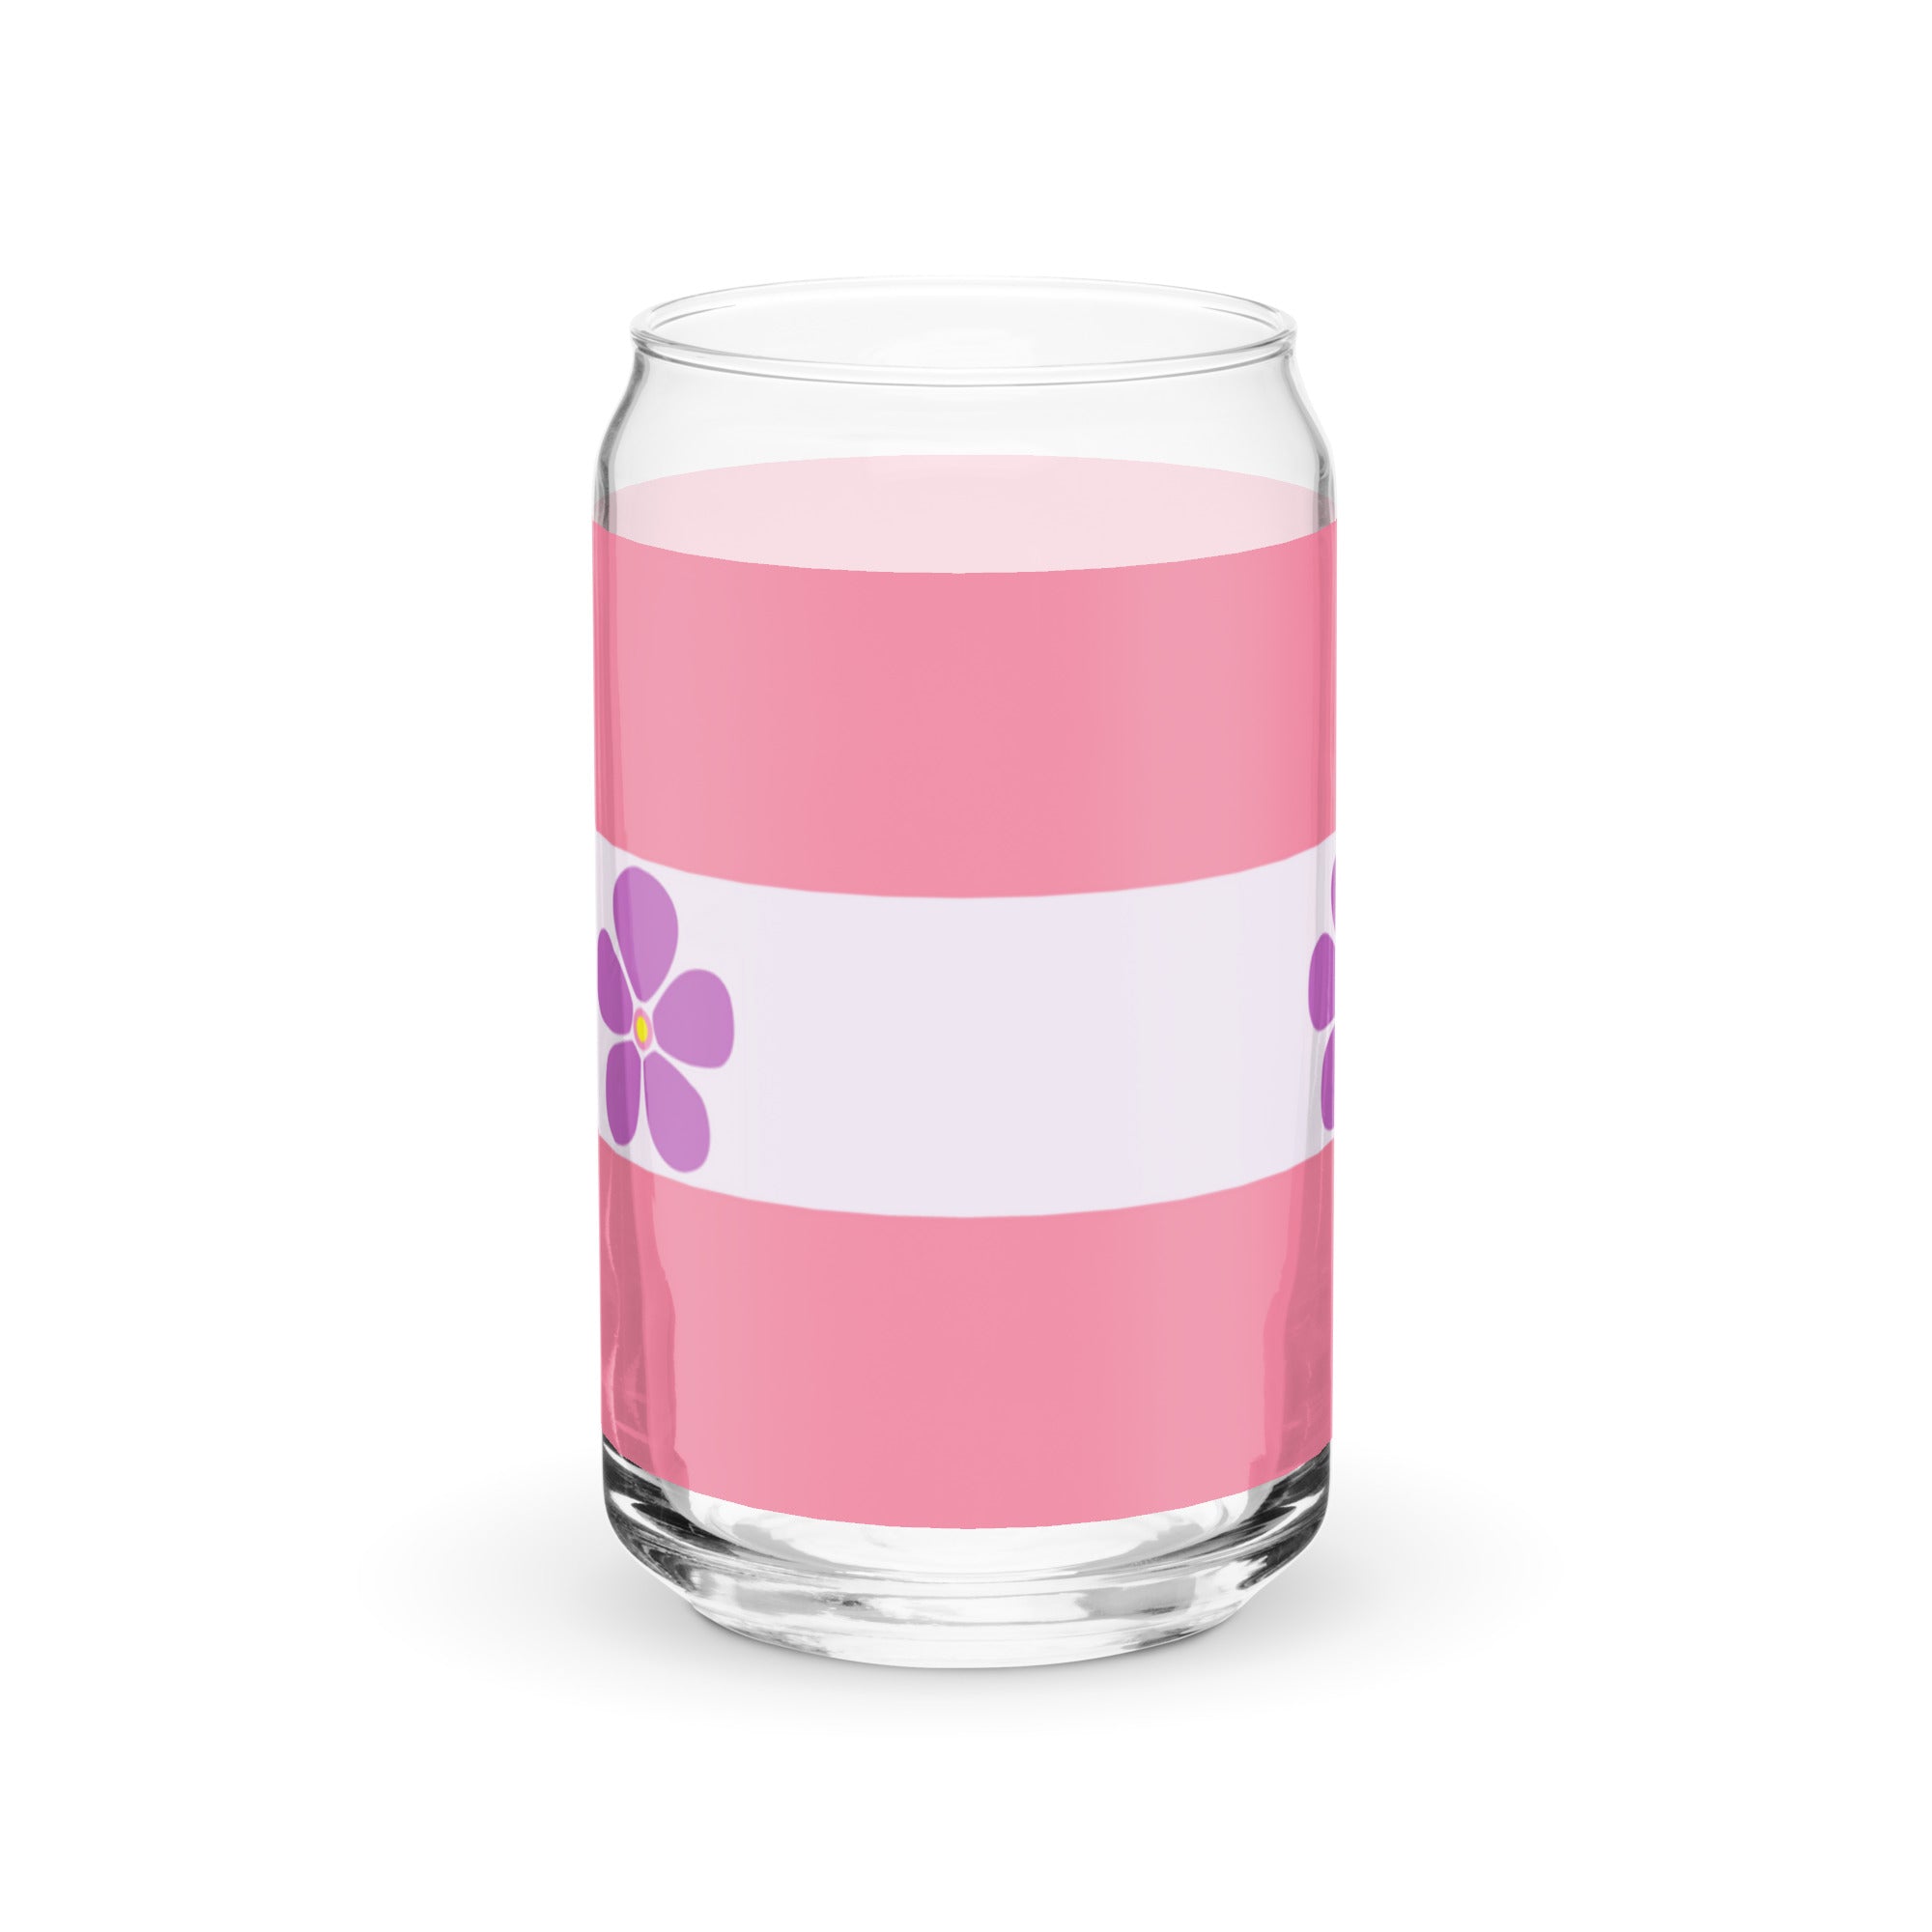 Sapphic Can-Shaped Glass